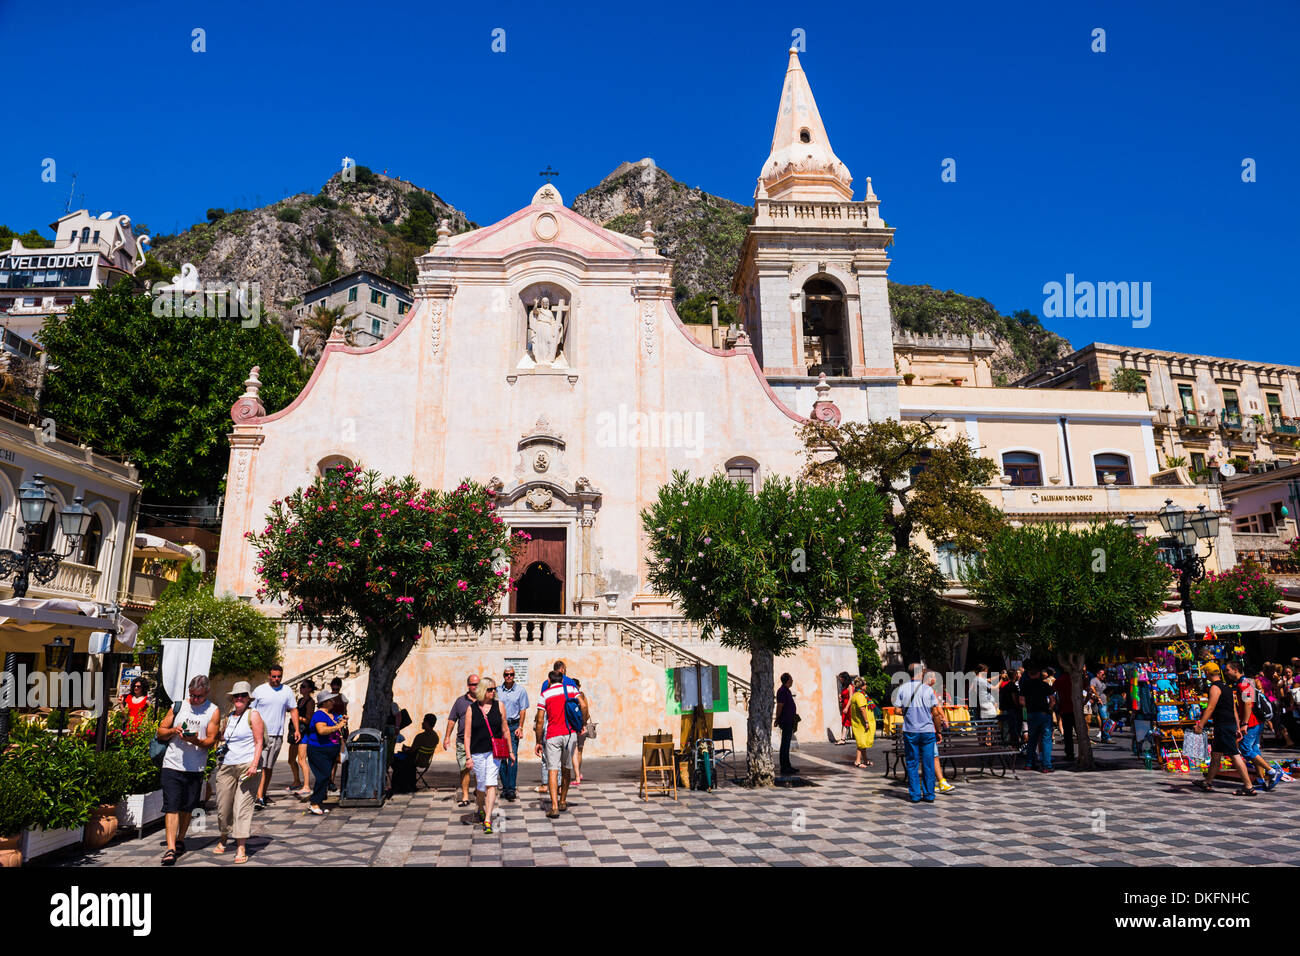 Tourists visiting Church of St. Joseph in Piazza IX Aprile on Corso Umberto, the main street in Taormina, Sicily, Italy, Europe Stock Photo